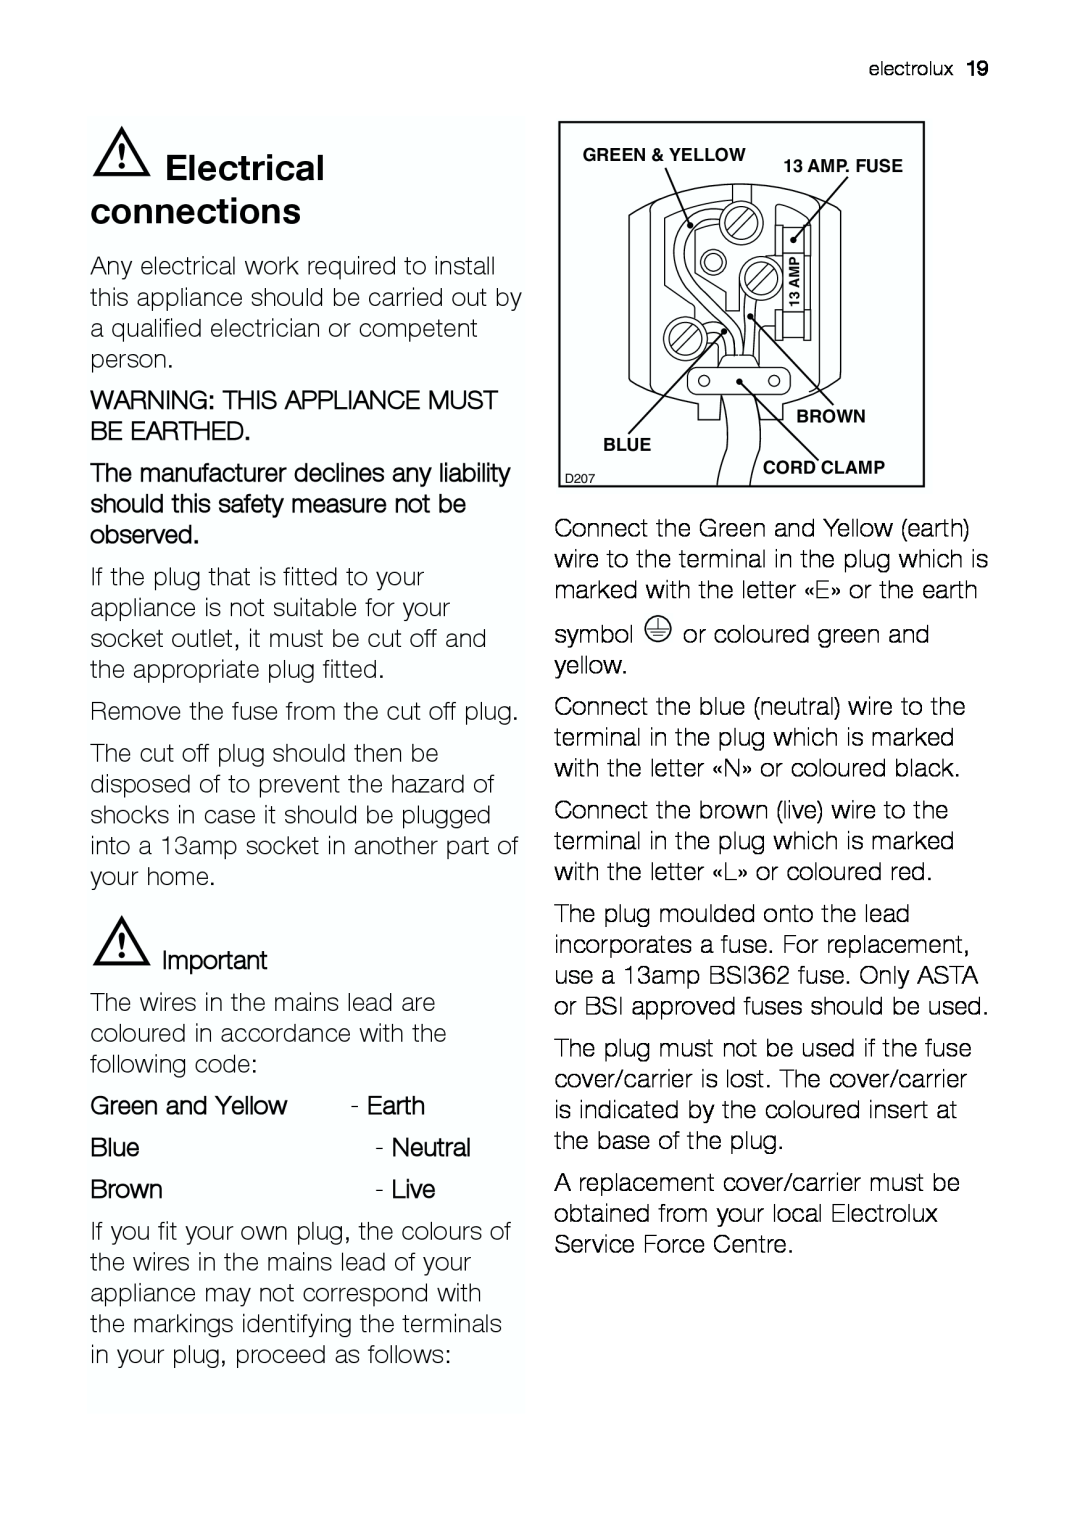 Electrolux EUF 23292 W manual Electrical connections, Warning This Appliance Must Be Earthed, Green and Yellow 